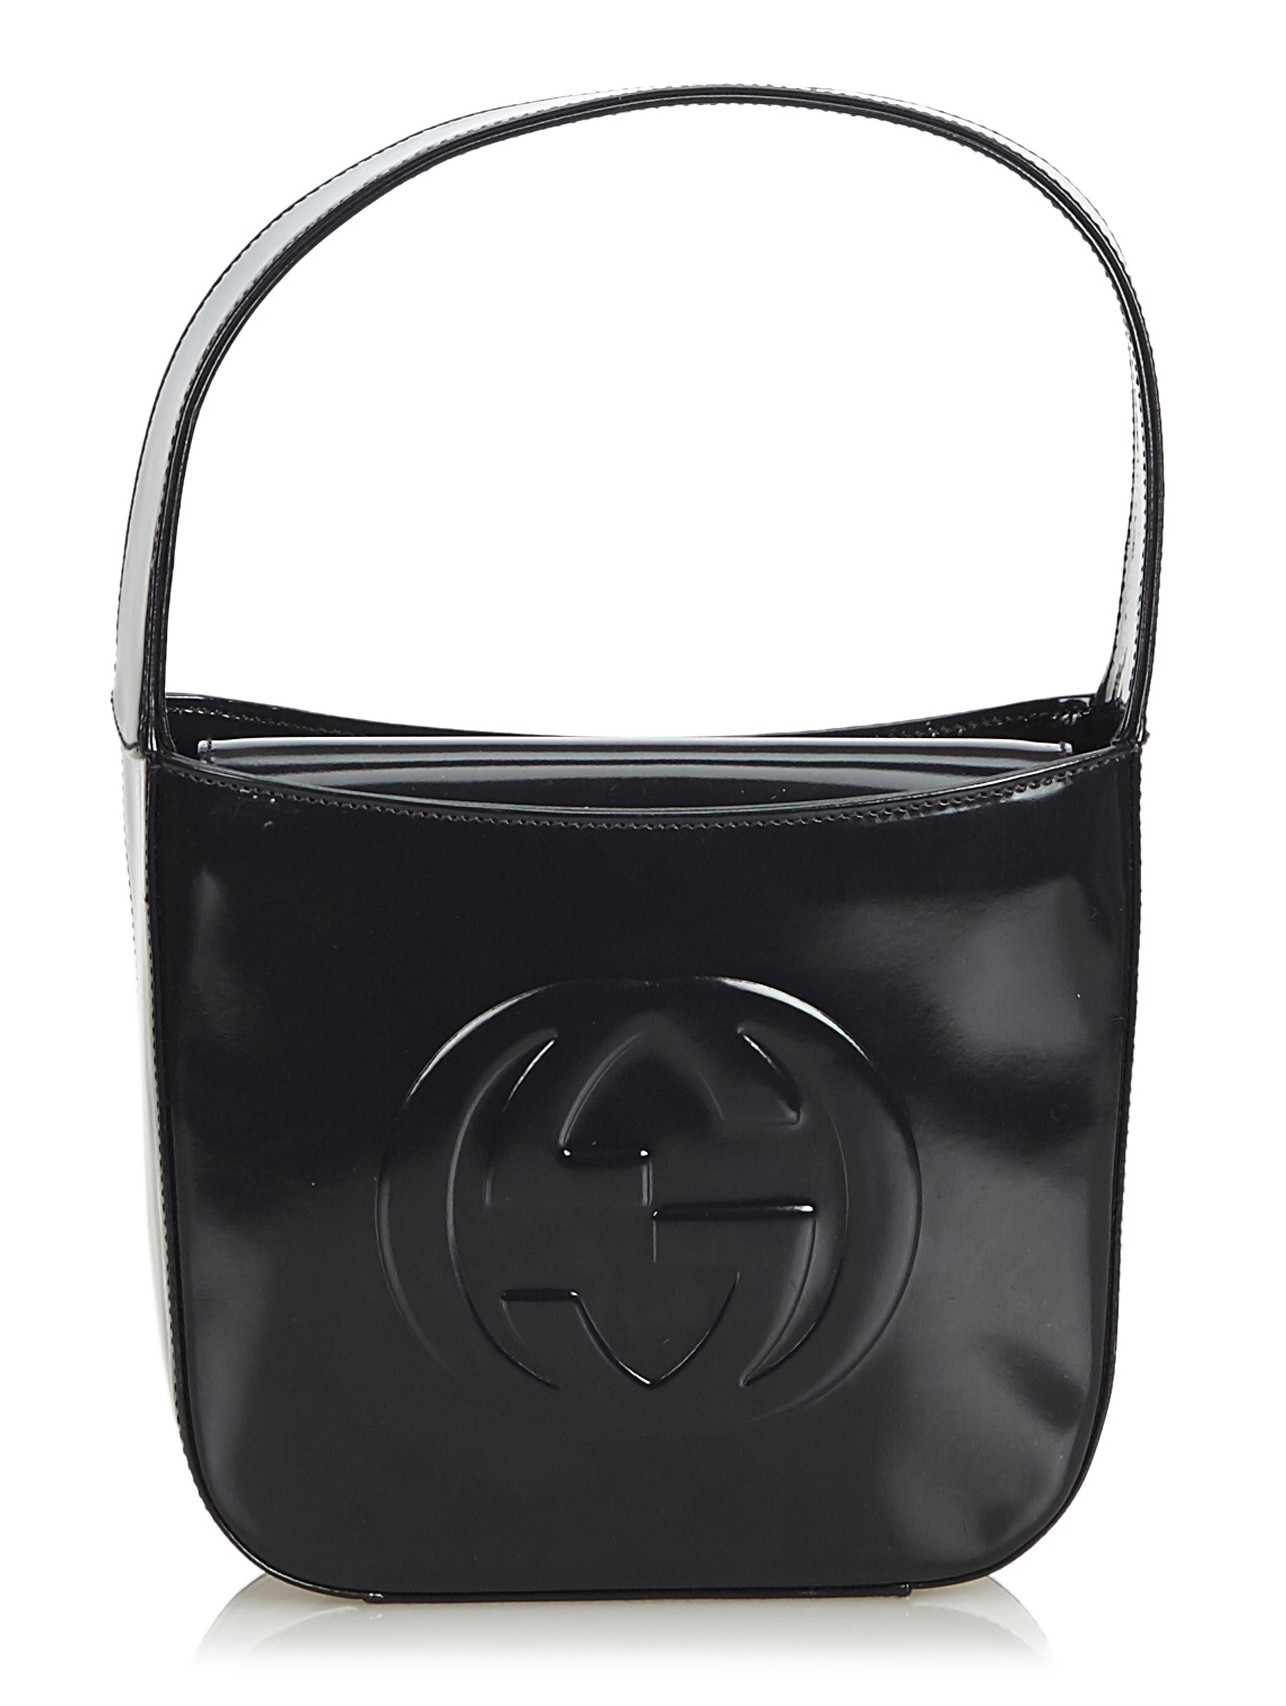 gucci double g bag